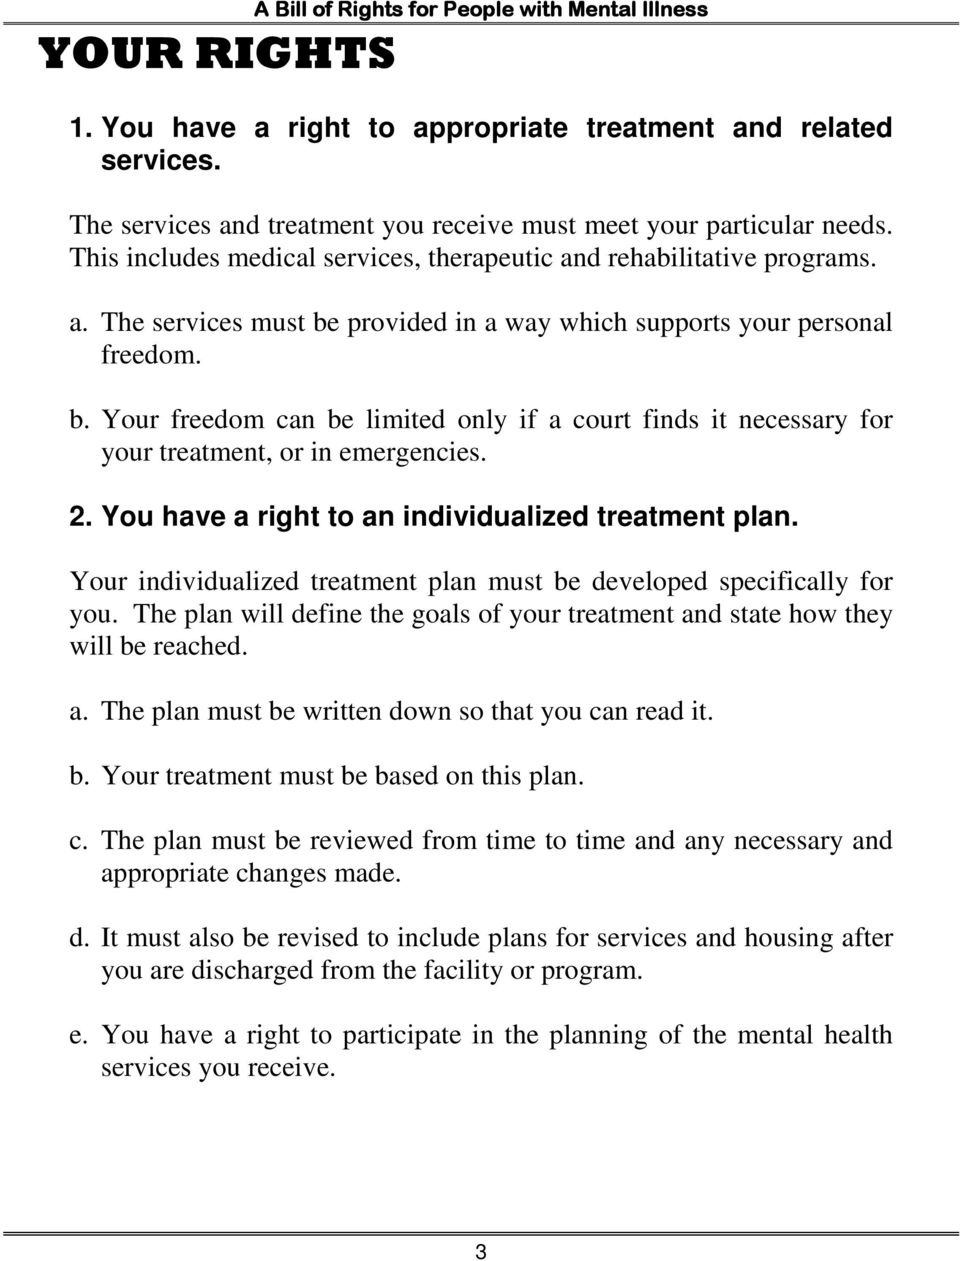 2. You have a right to an individualized treatment plan. Your individualized treatment plan must be developed specifically for you.